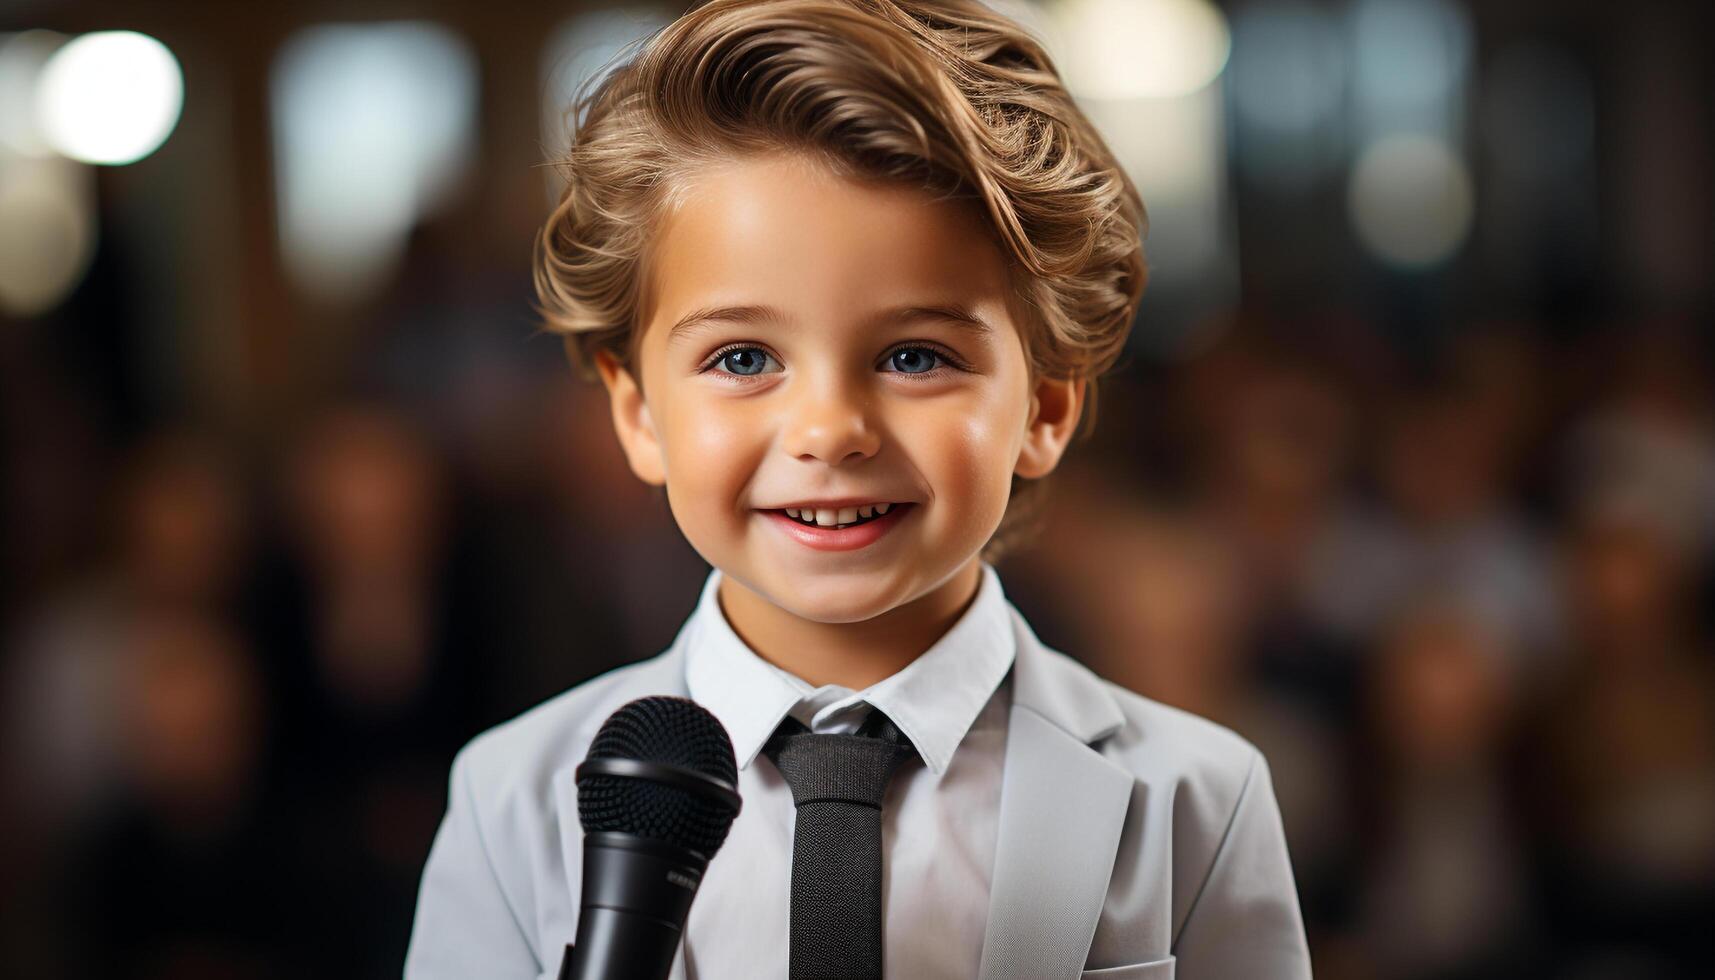 AI generated A cute, cheerful boy smiling, holding a microphone on stage generated by AI photo